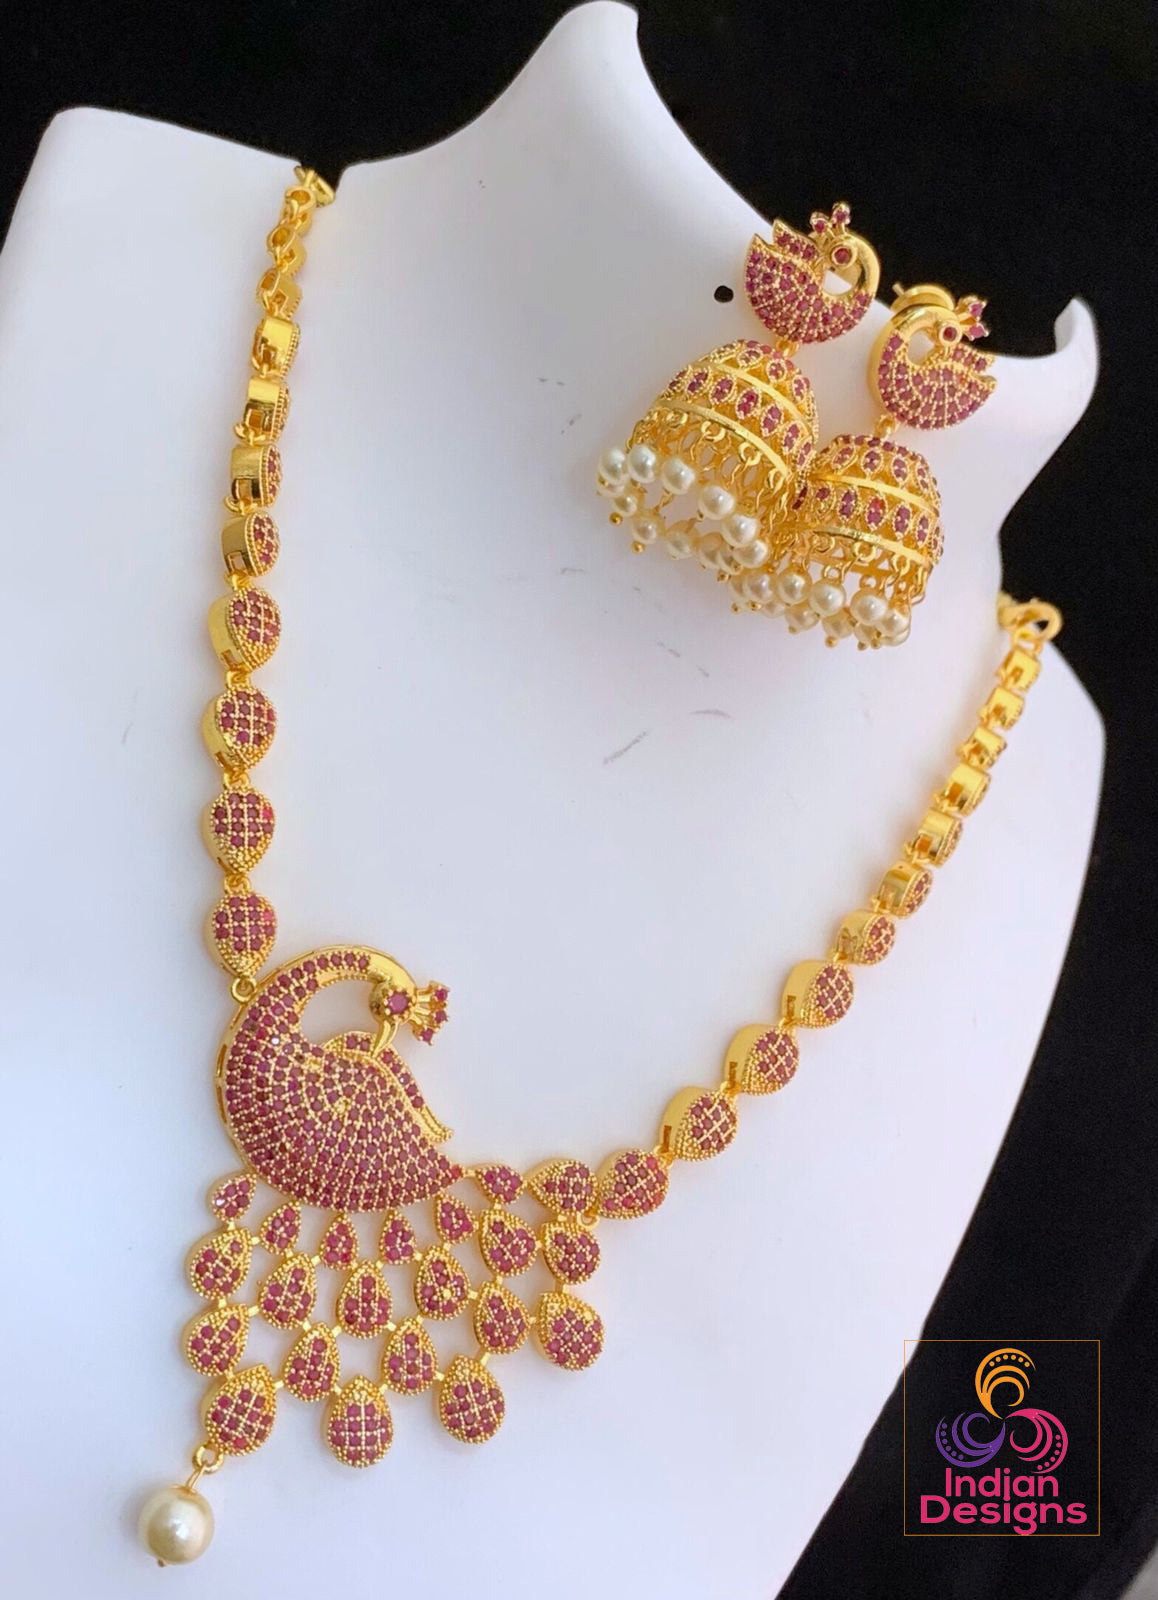 Dancing Peacock Design American Diamond Necklace Earring set |Gold Plated Peacock American Diamond Necklace with Ruby stones |Indian Jewelry